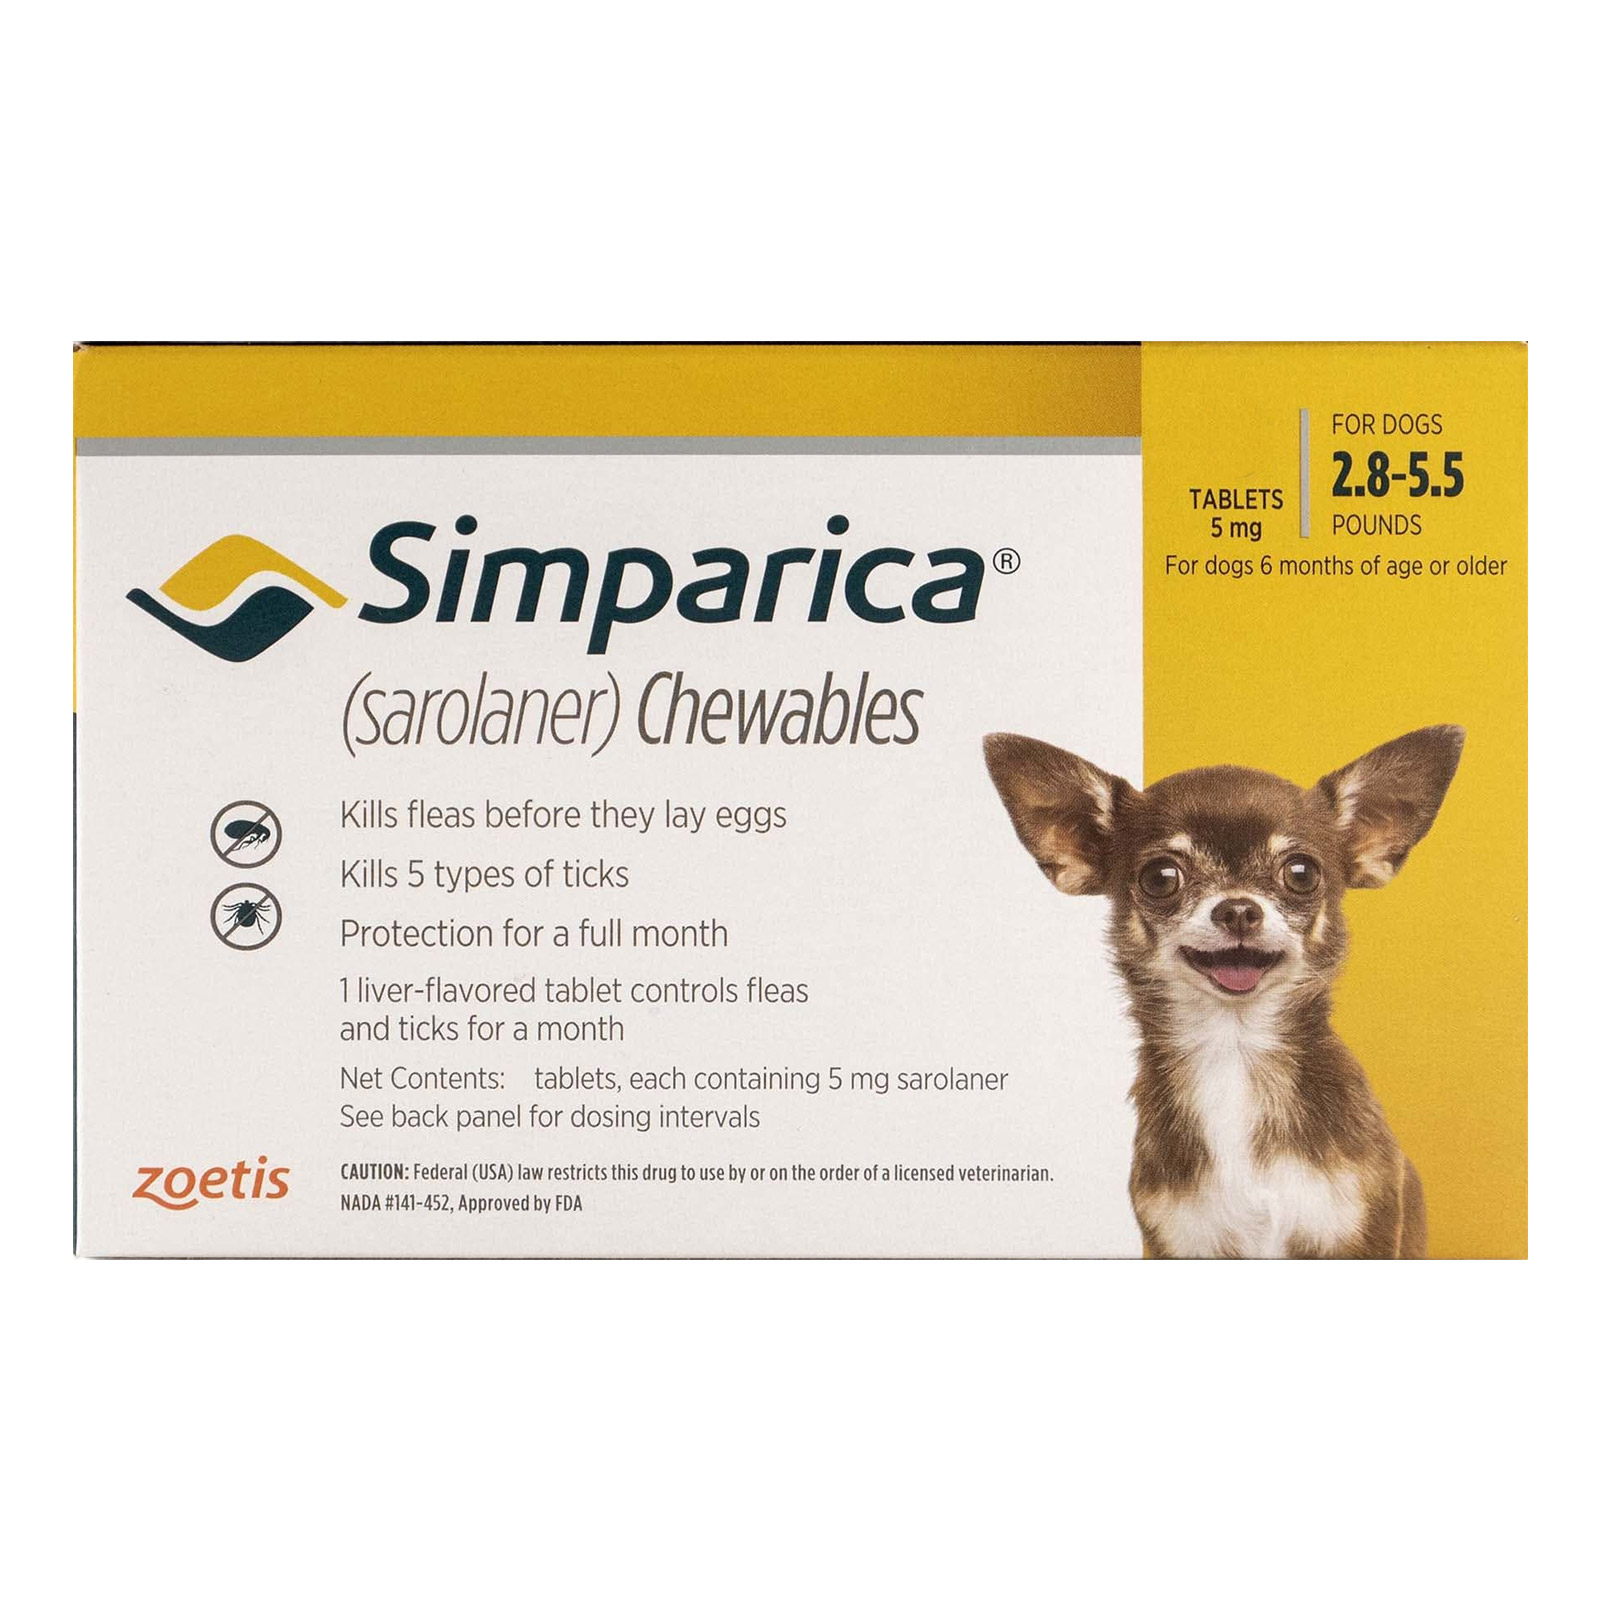 Simparica Chewables For Dogs 2.8-5.5 Lbs Yellow 3 Doses